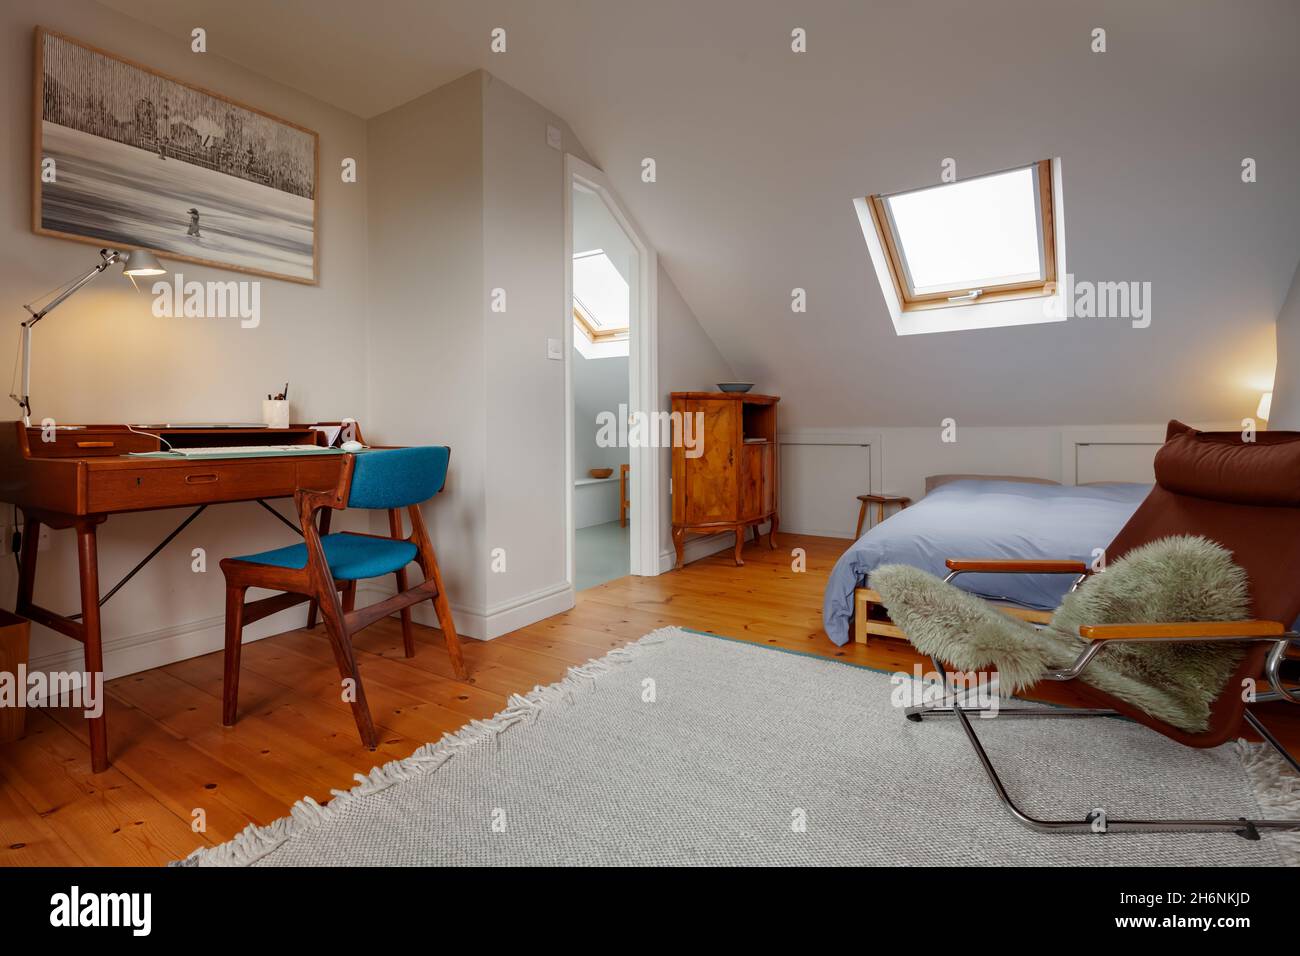 Cambridge, England - October 11 2019: Loft style bedroom study with wooden floorboards containing desk, armchair and bed. Stock Photo